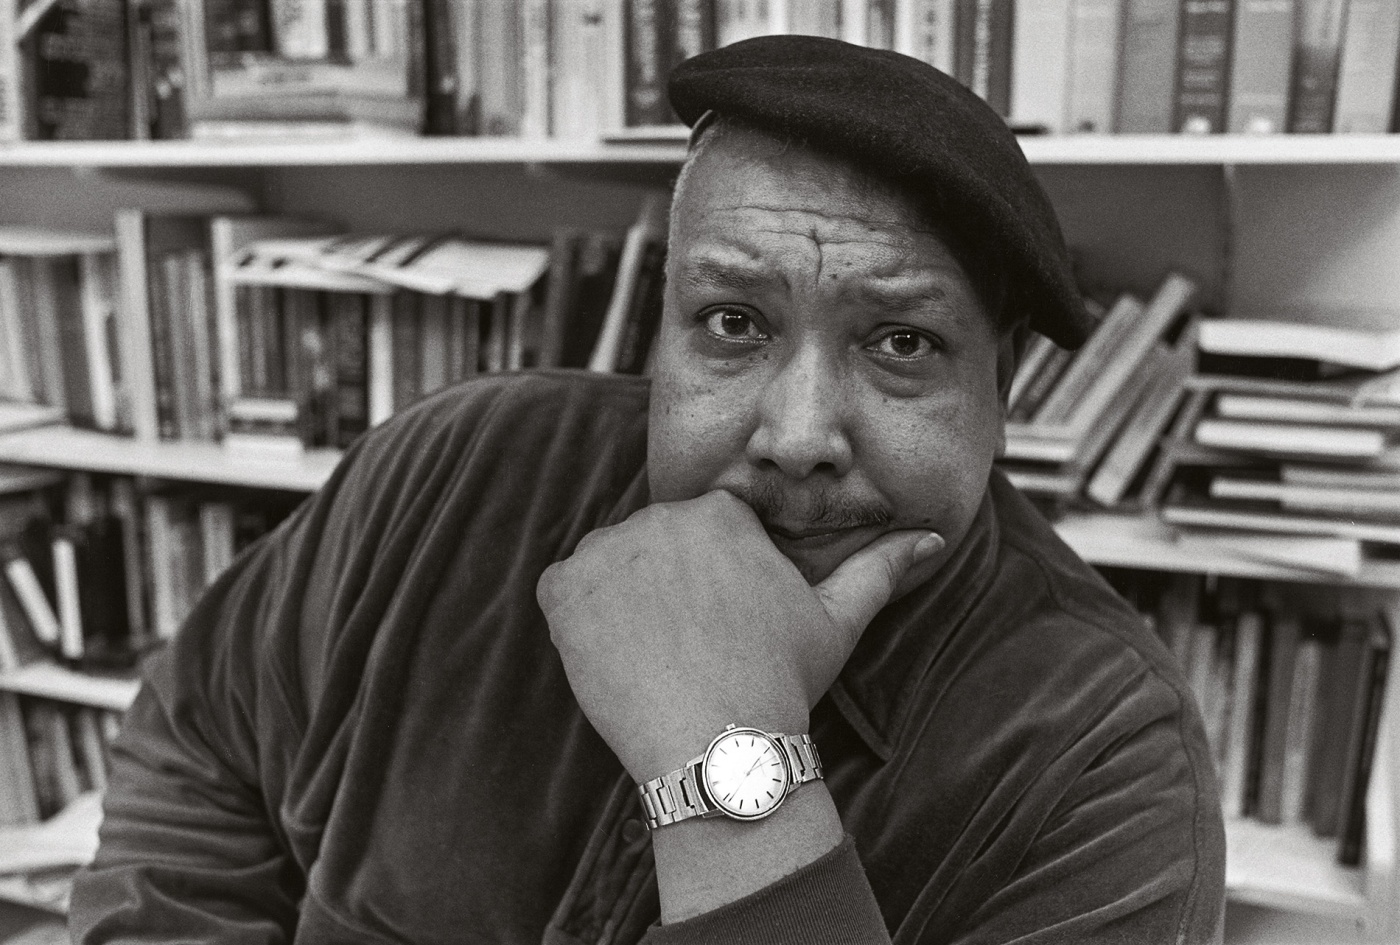 Archival image of Michael S. Harper with a beret on his head and books behind him.